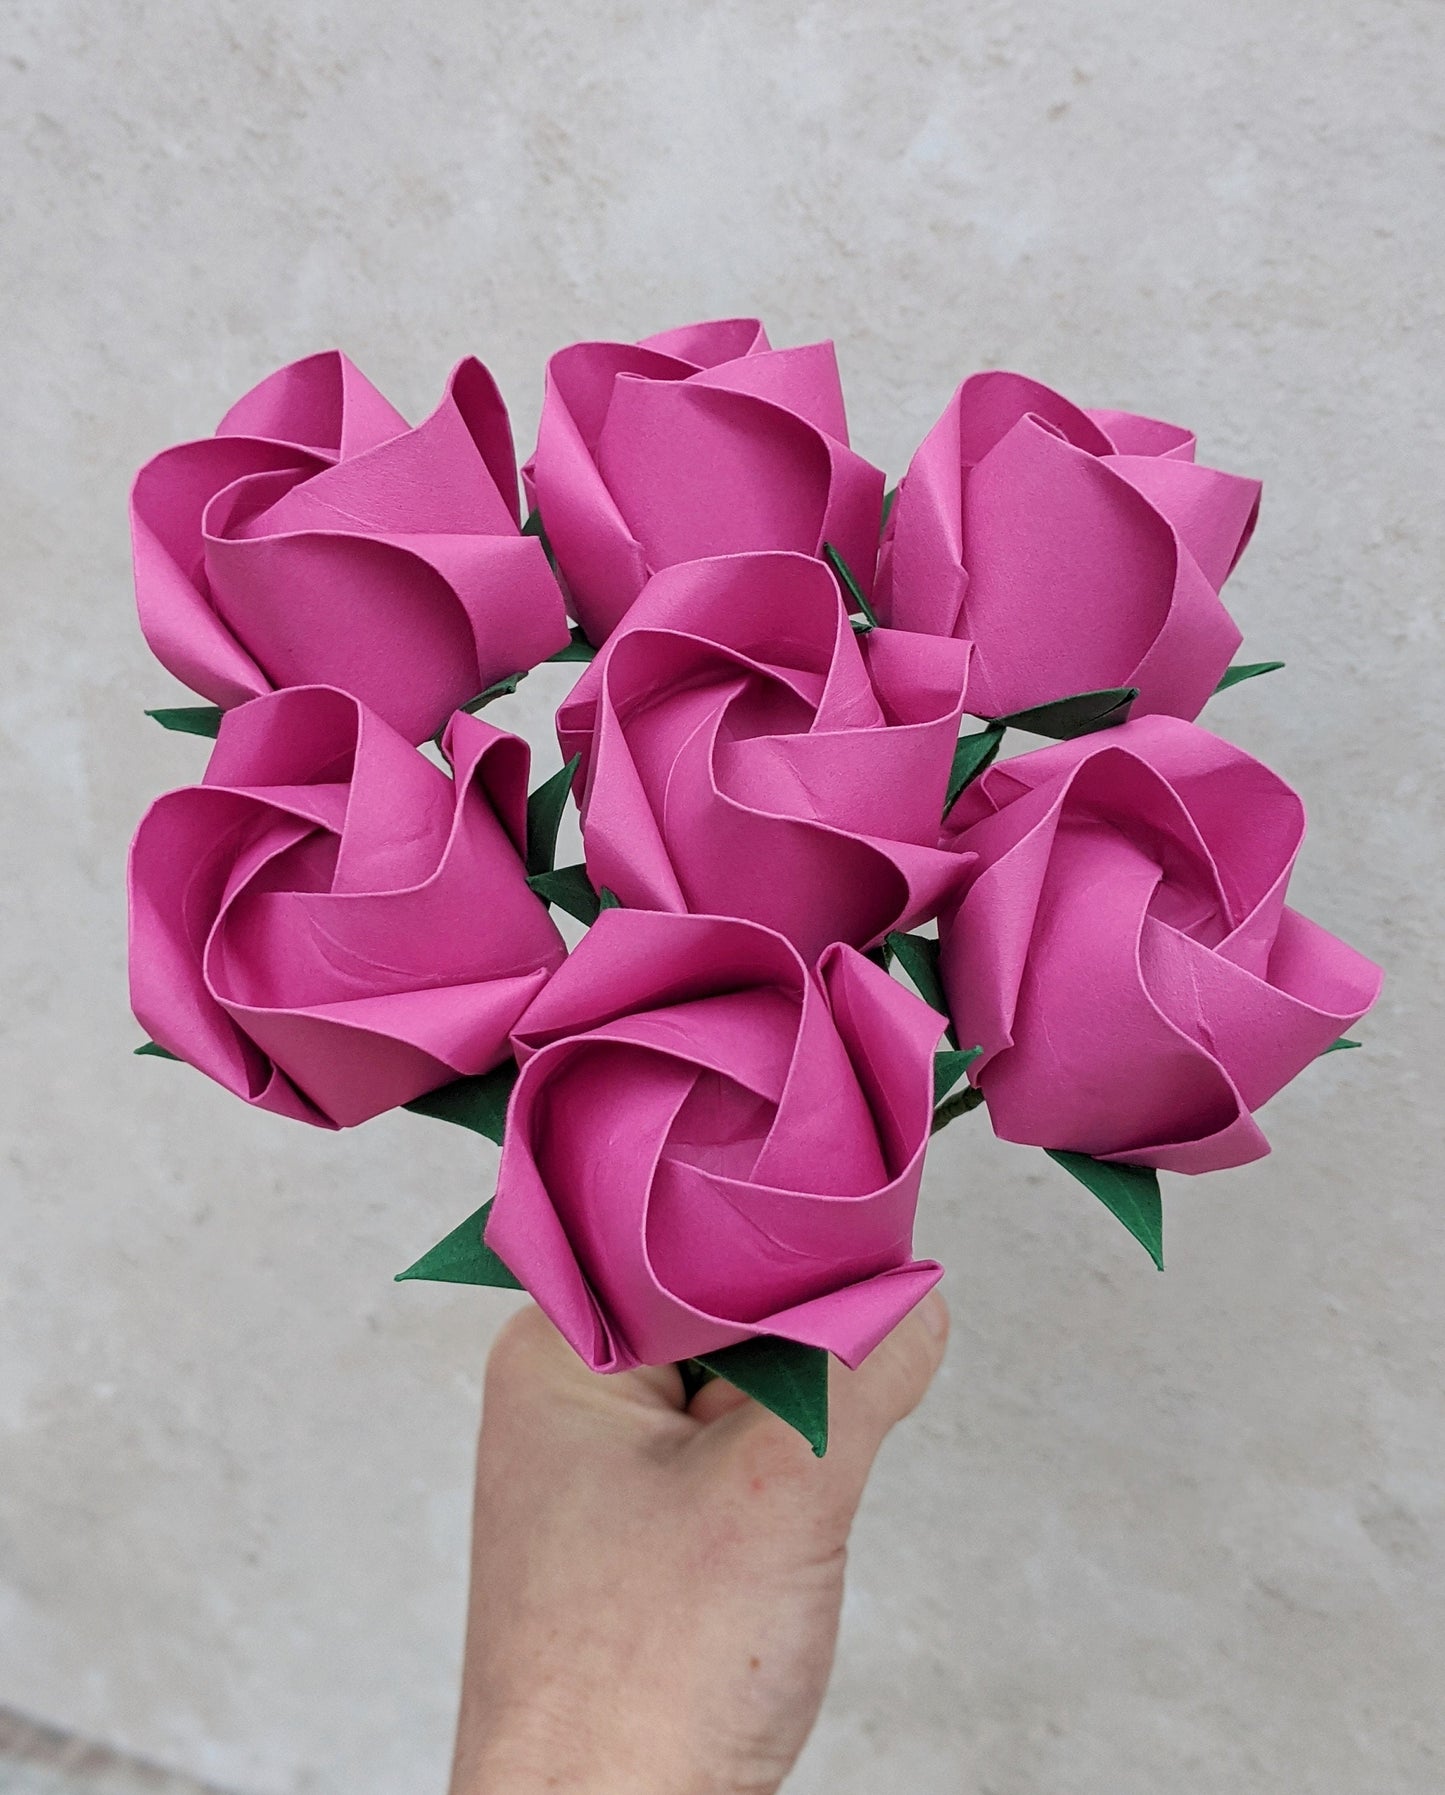 Pink paper roses gift, origami flower bouquet